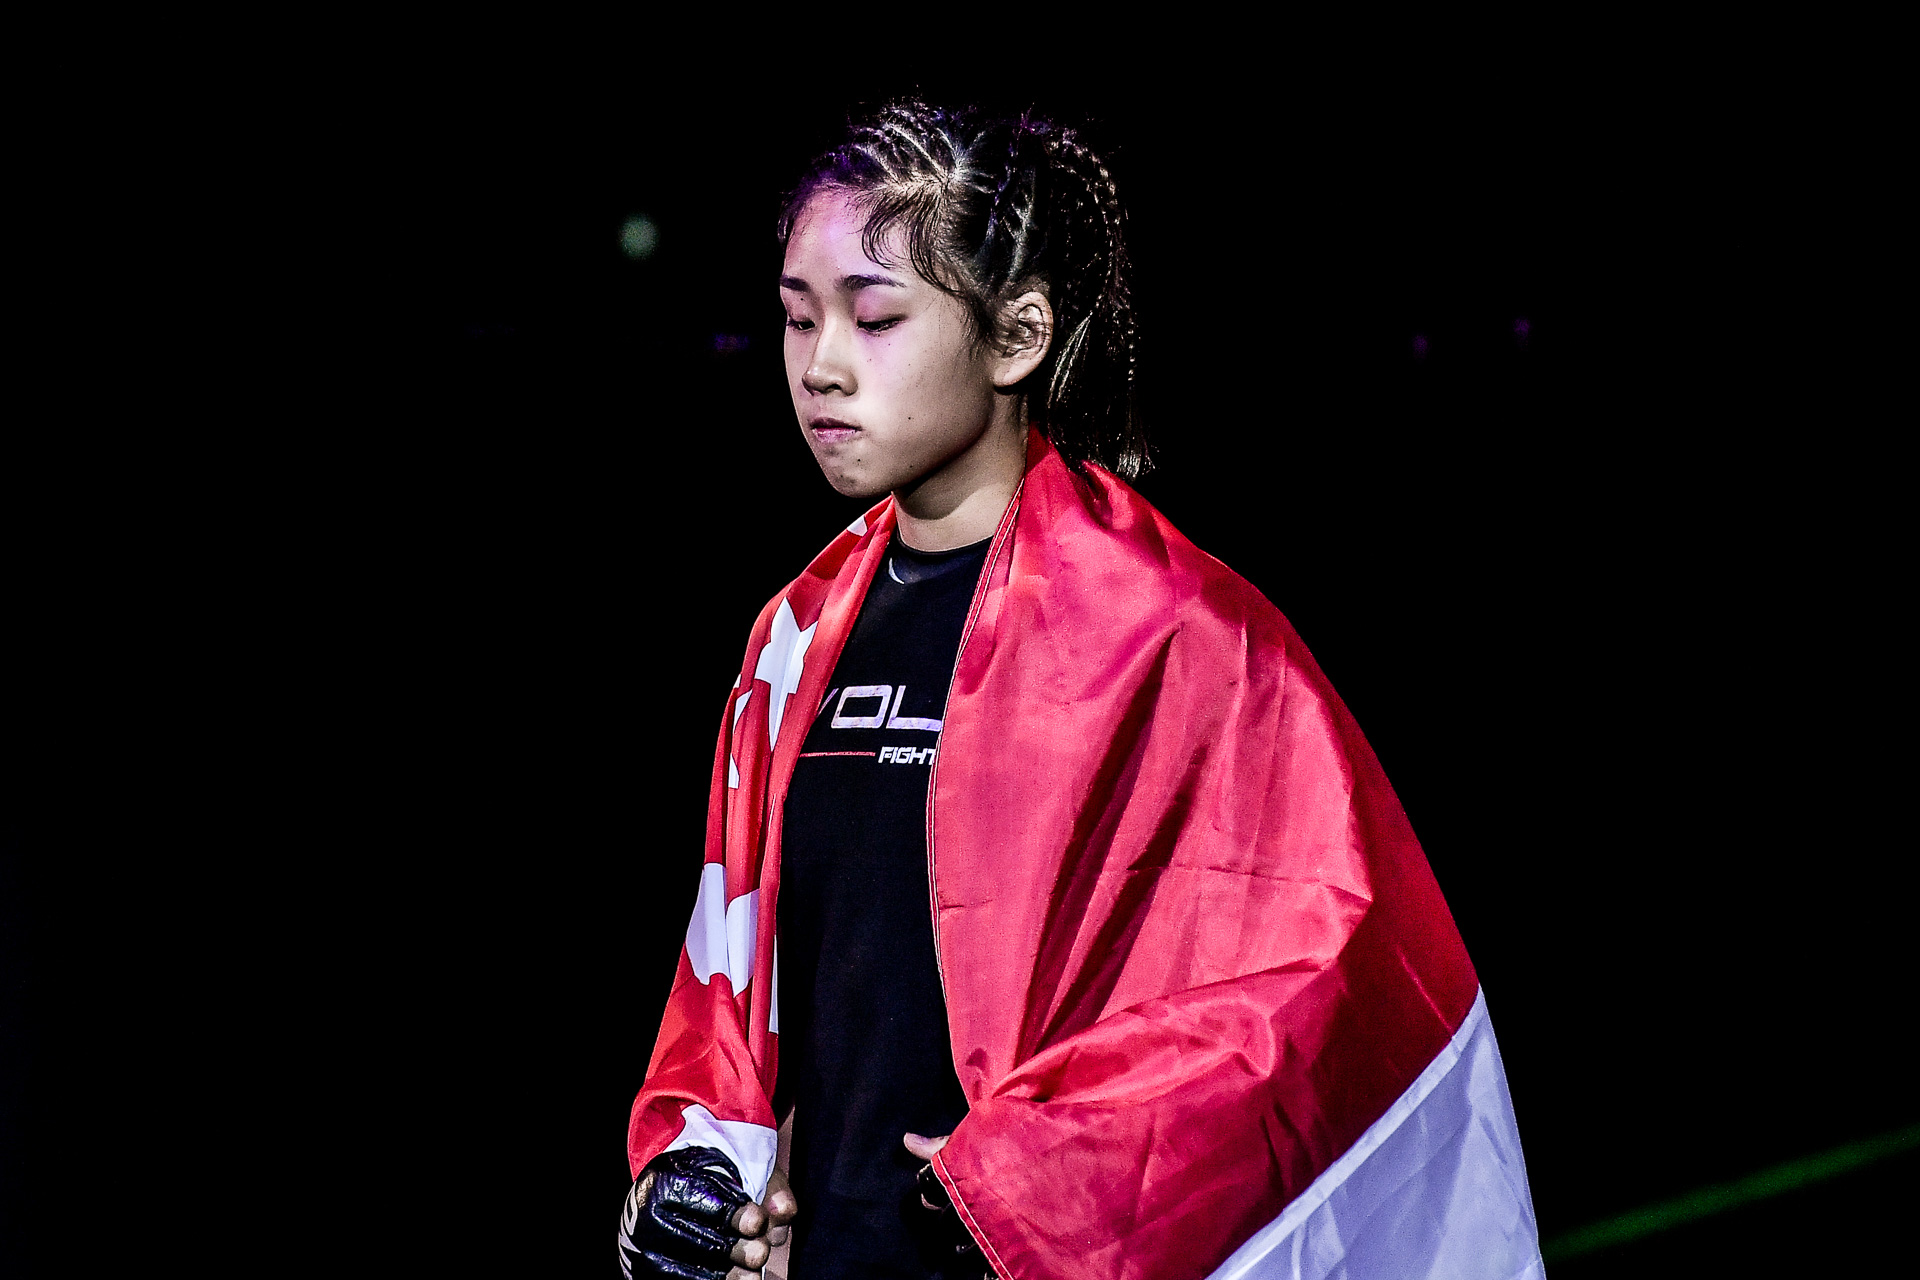 Image of Victoria Lee making her entrance at One Championship